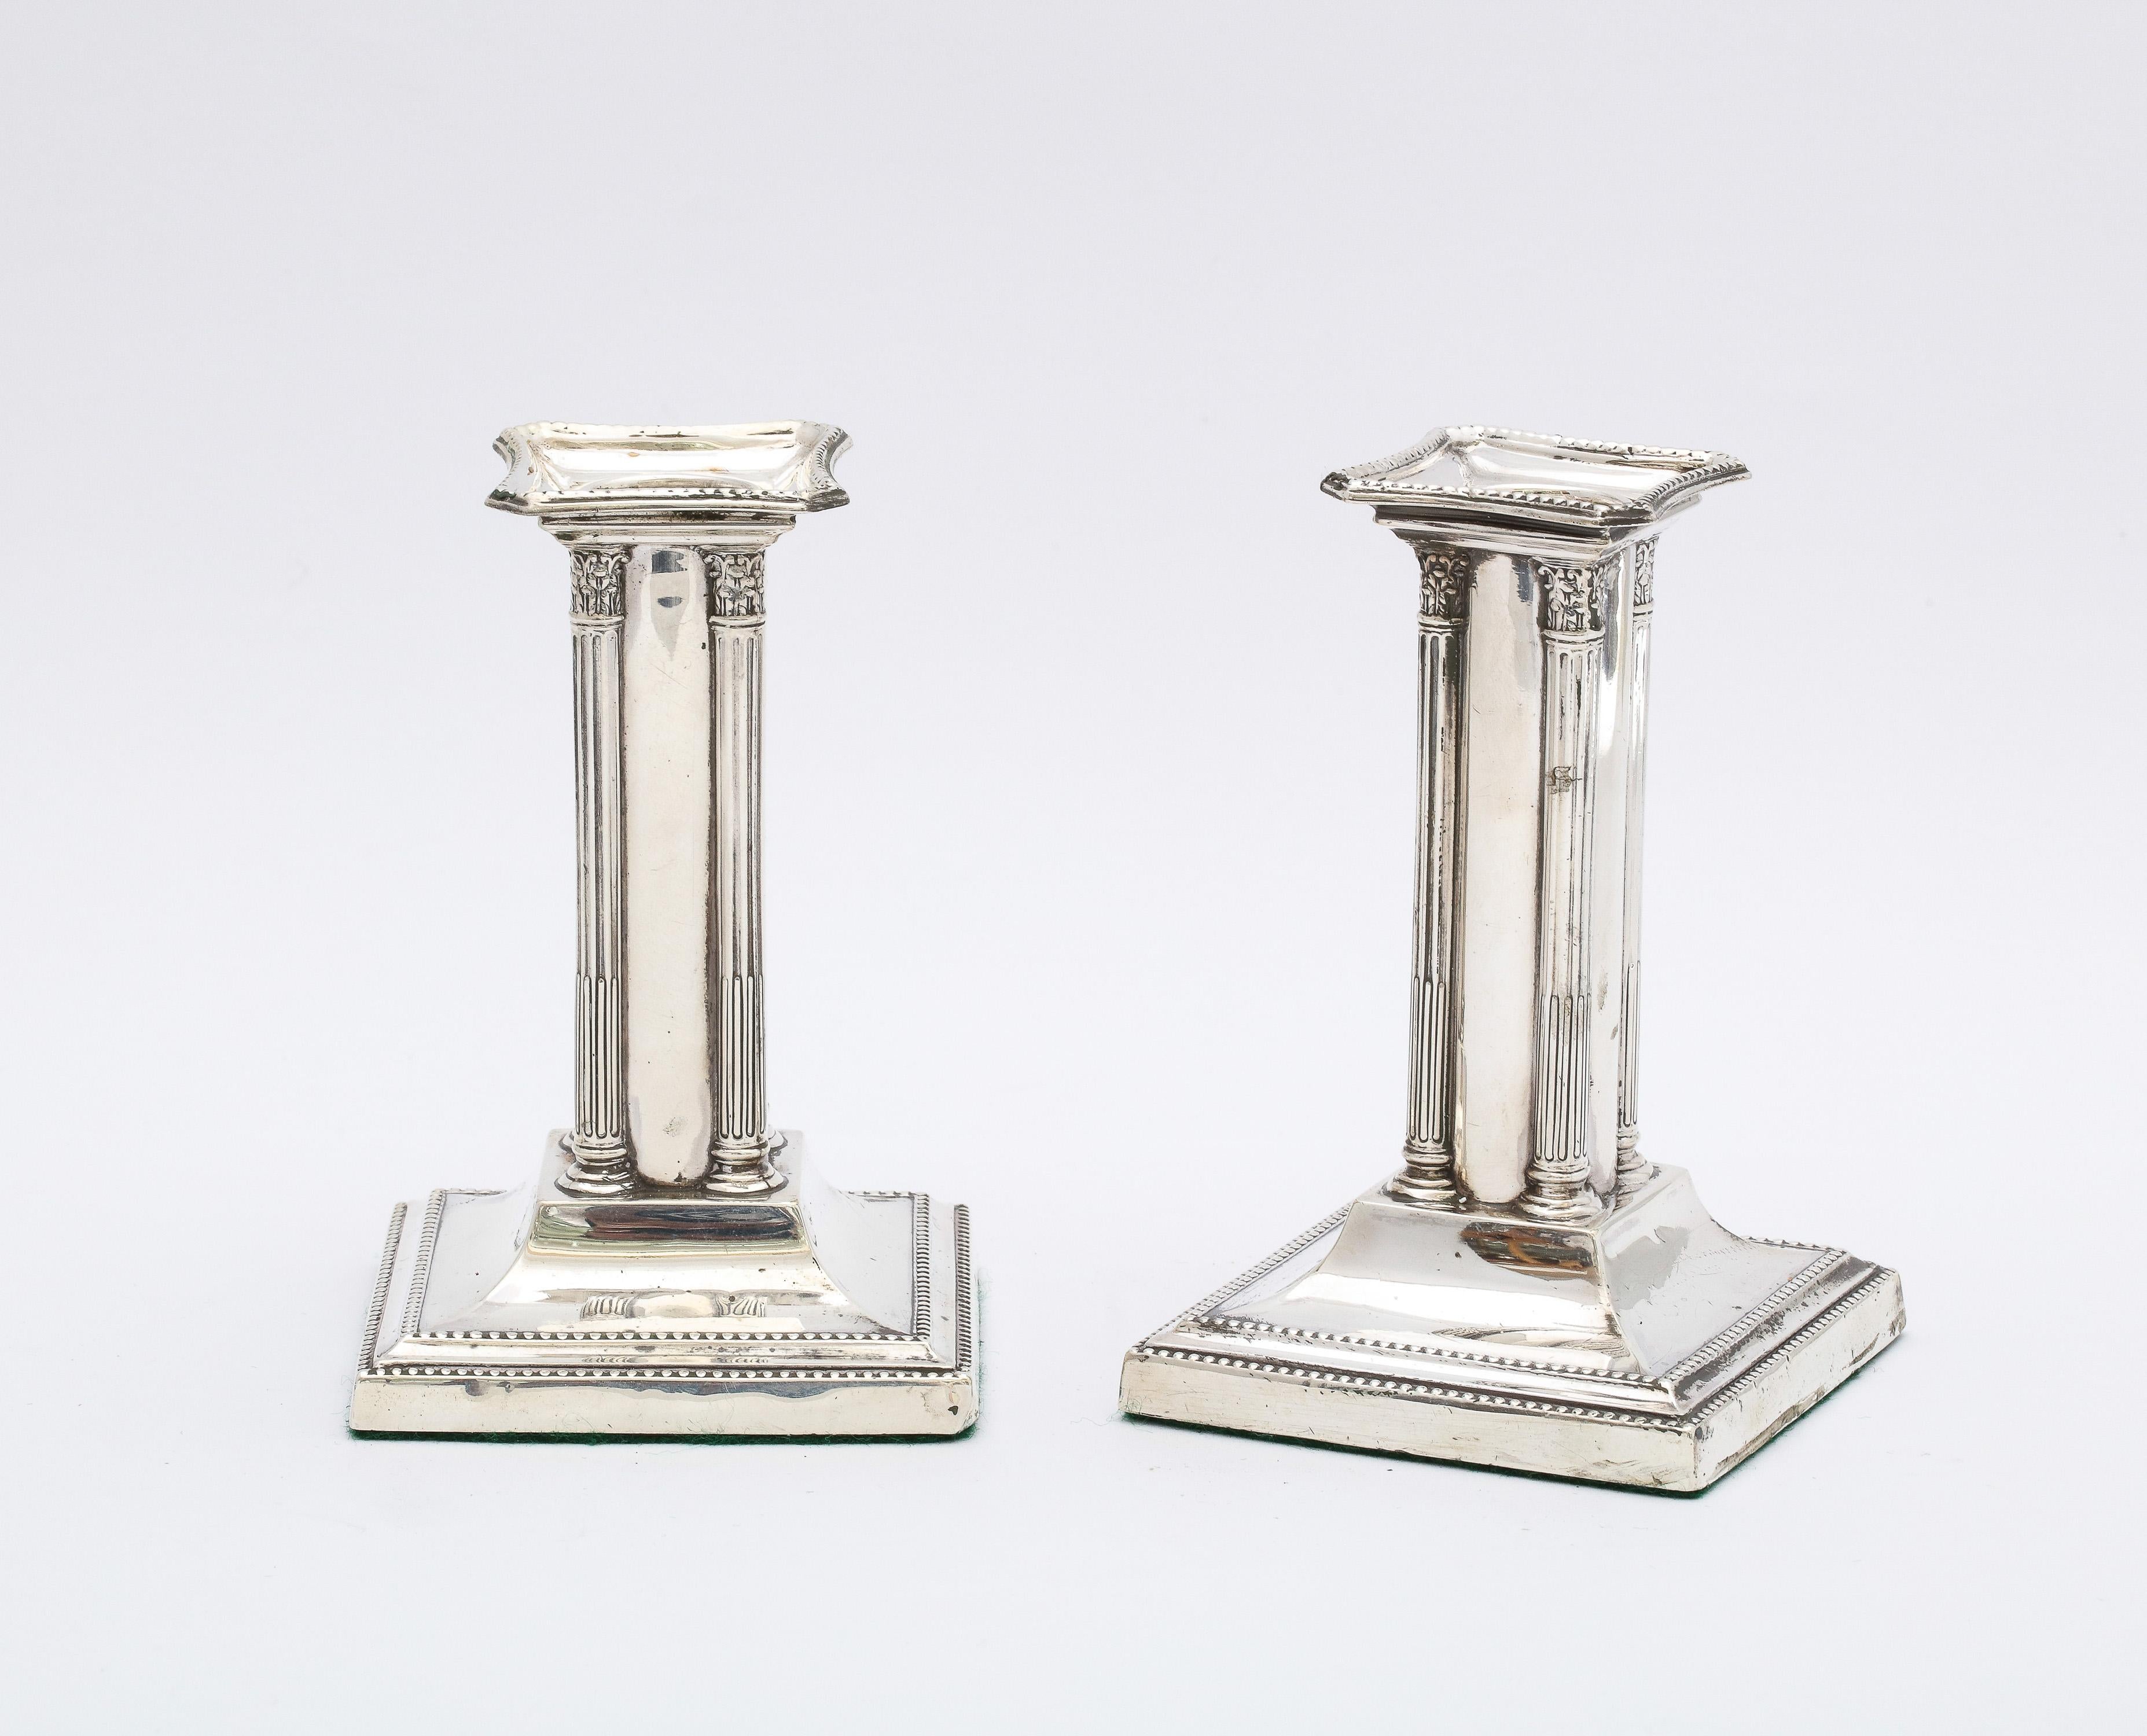 Unusual Pair of Edwardian Period Neoclassical Style Sterling Silver Candlesticks In Good Condition For Sale In New York, NY